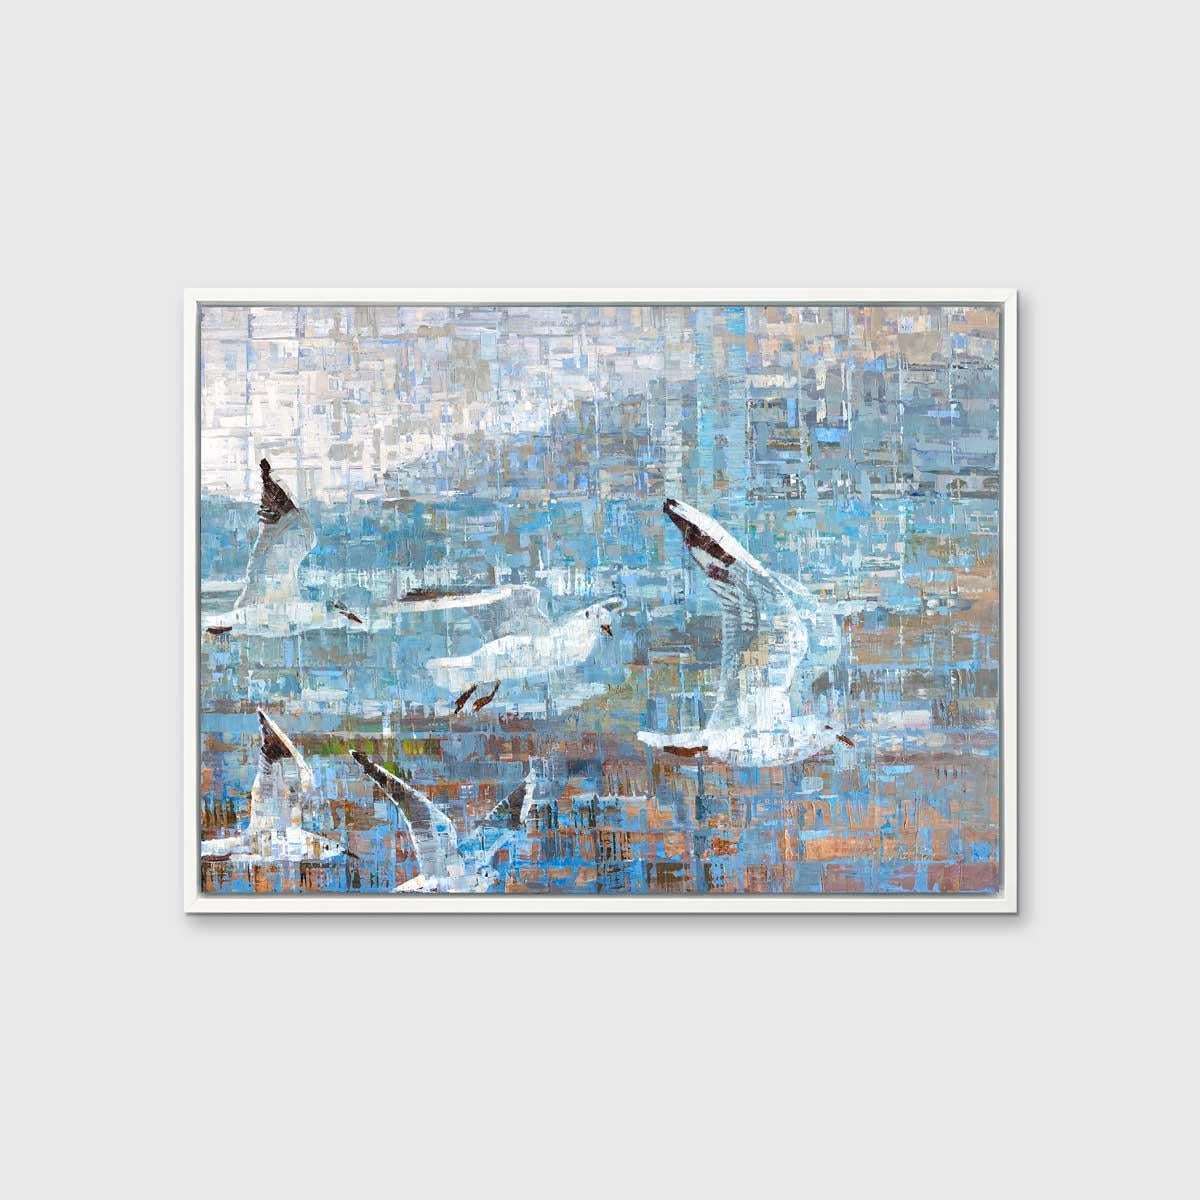 This abstract limited edition giclee print by Ned Martin features birds in flight. Five white birds with dark feathers on the tips of their wings fly in a formation through a primarily blue sky that is rendered in the artist's signature abstract